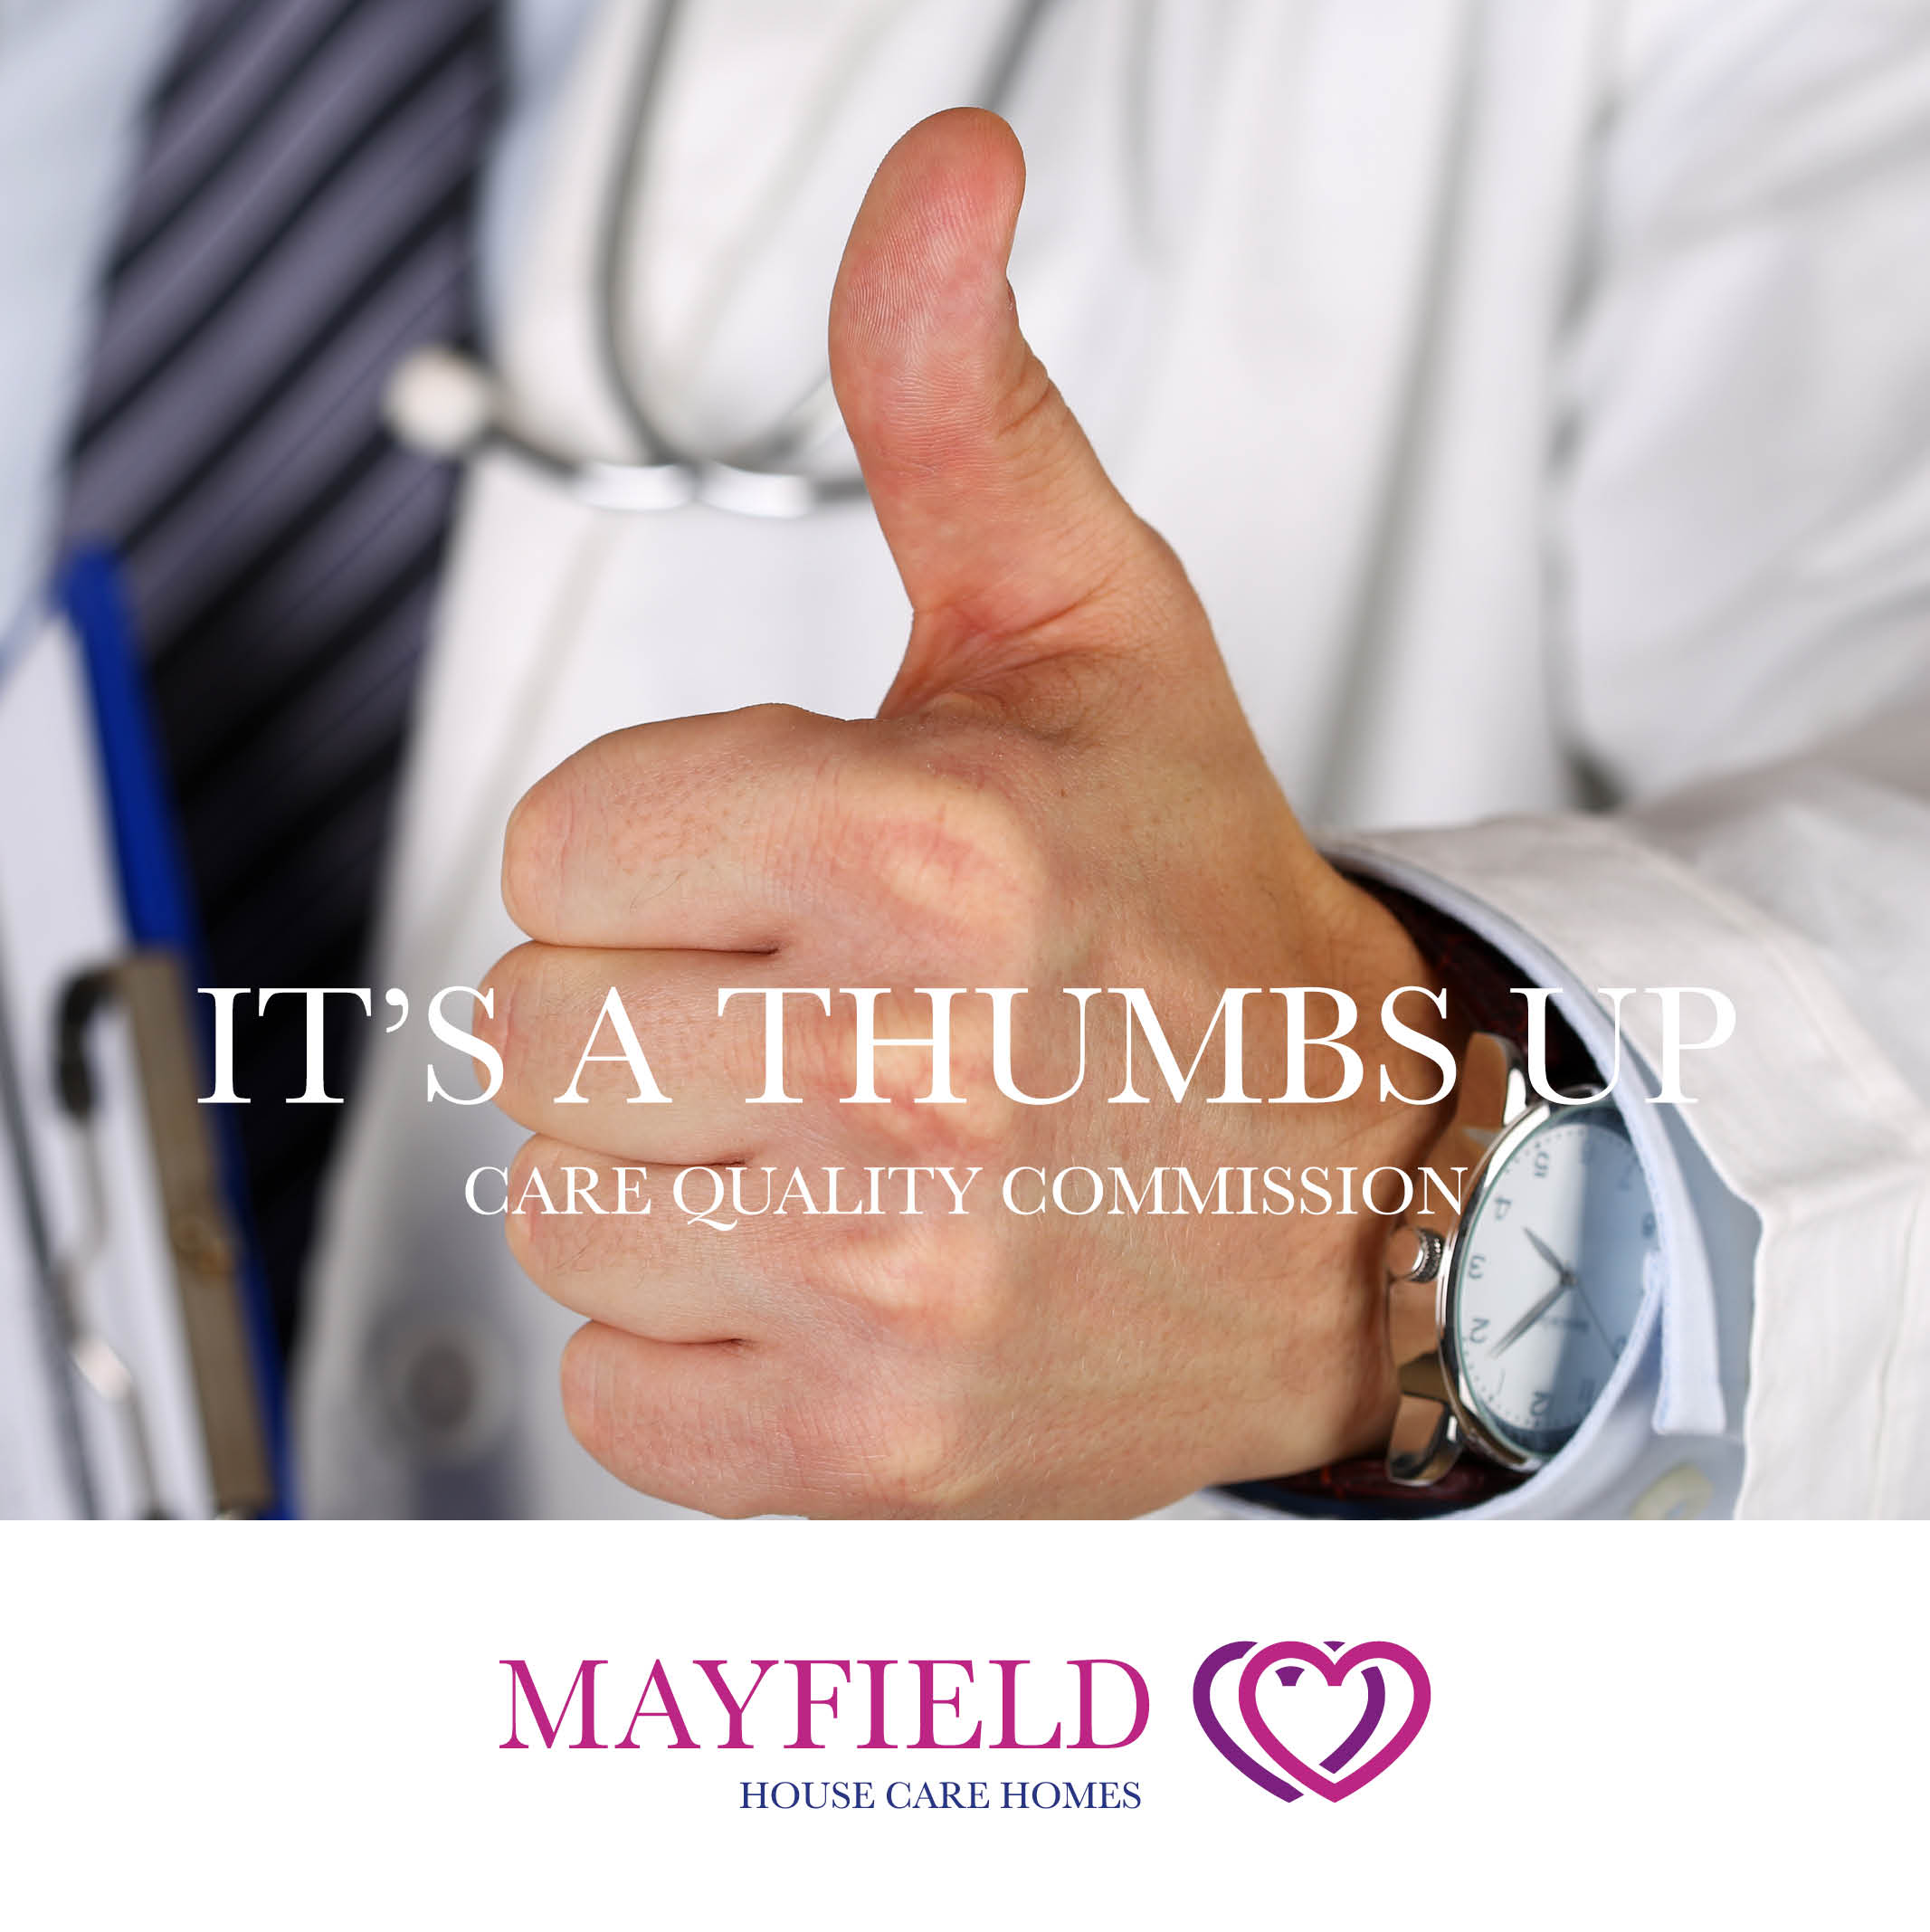 It's A Thumbs Up (Care Quality Commission)